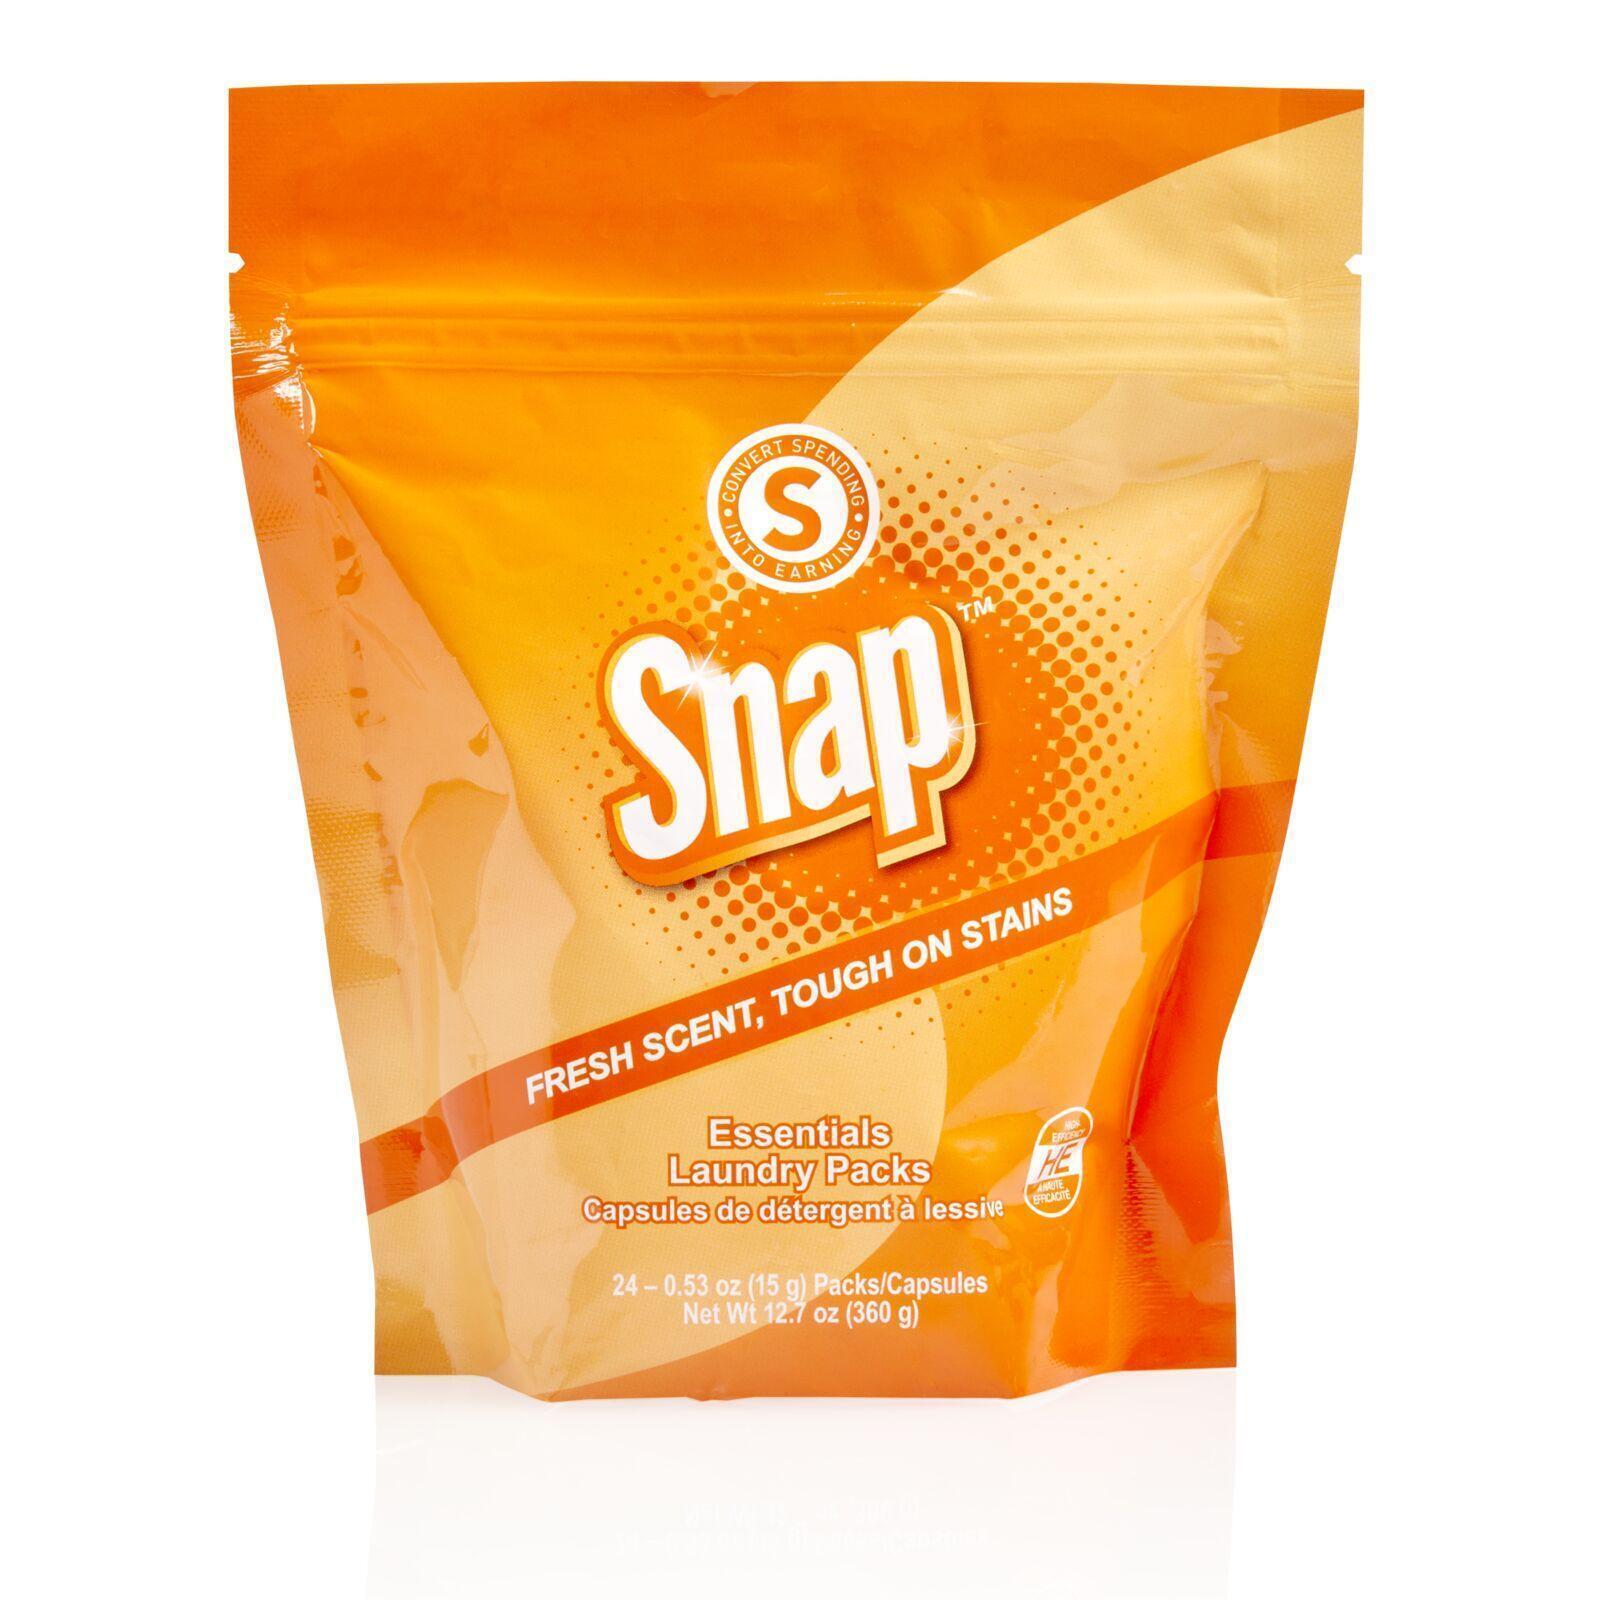 Snap® Essentials Laundry Packs – Fresh Scent